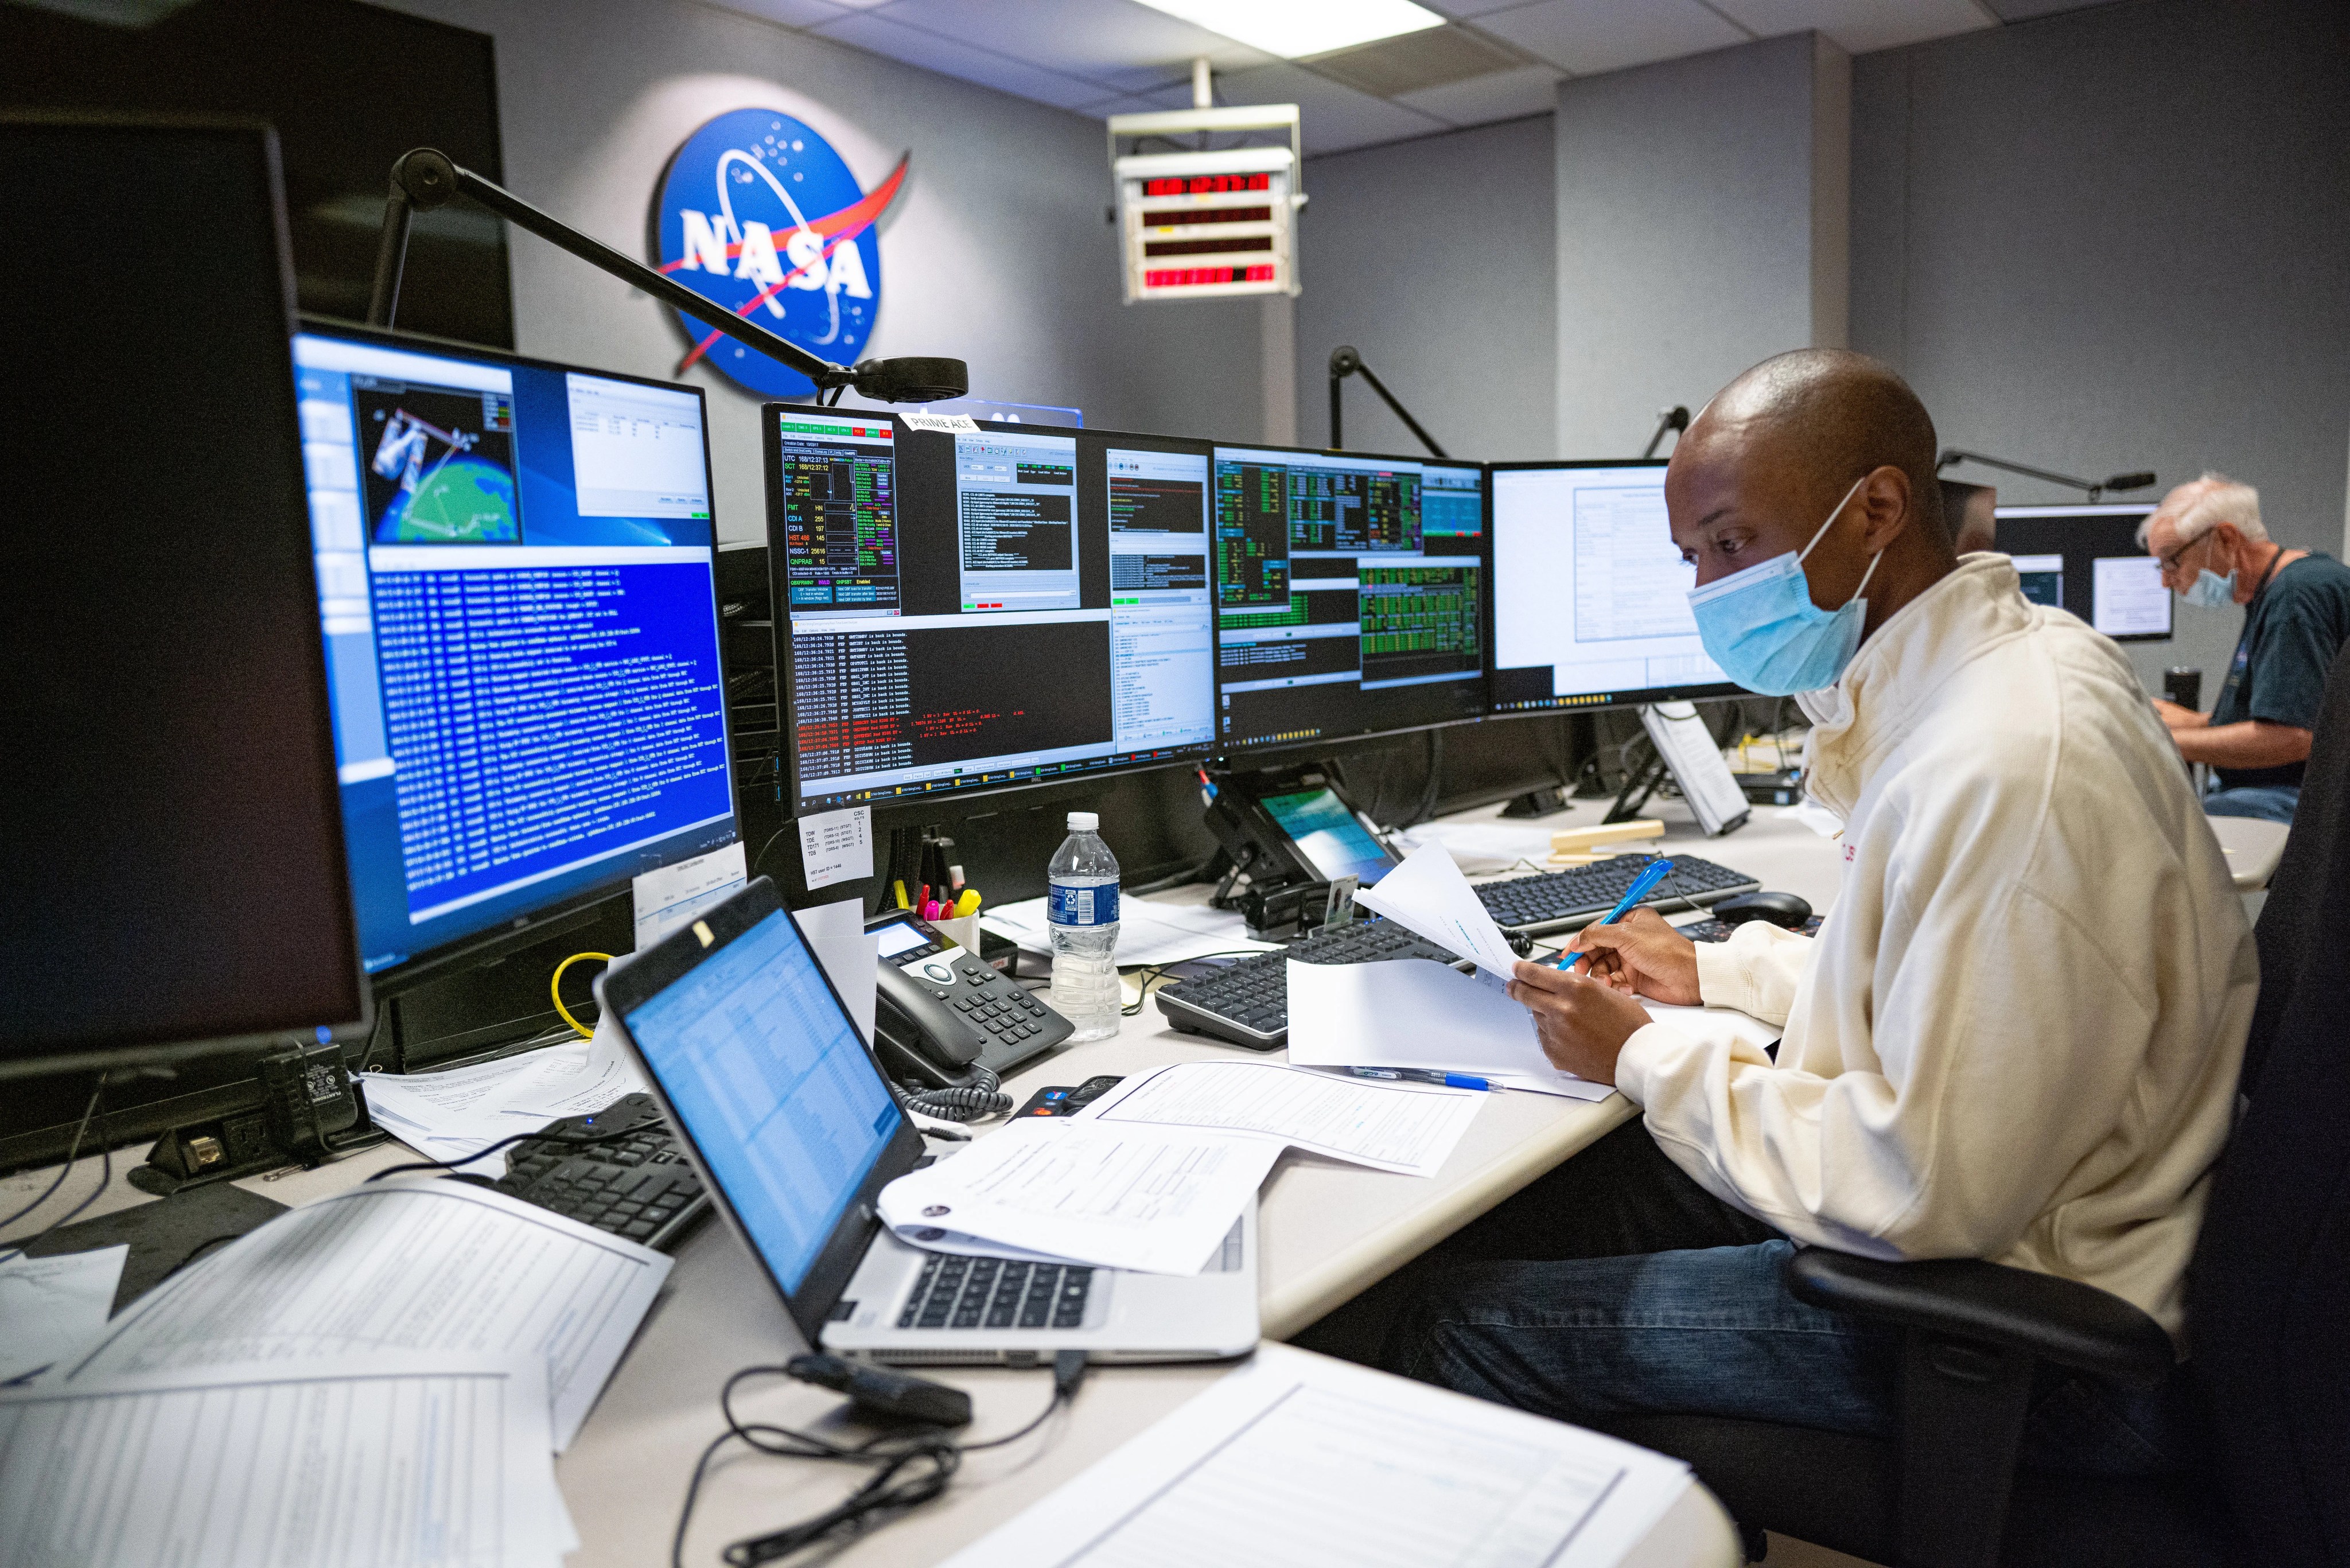 Man at computer desk with many screens working on Hubble